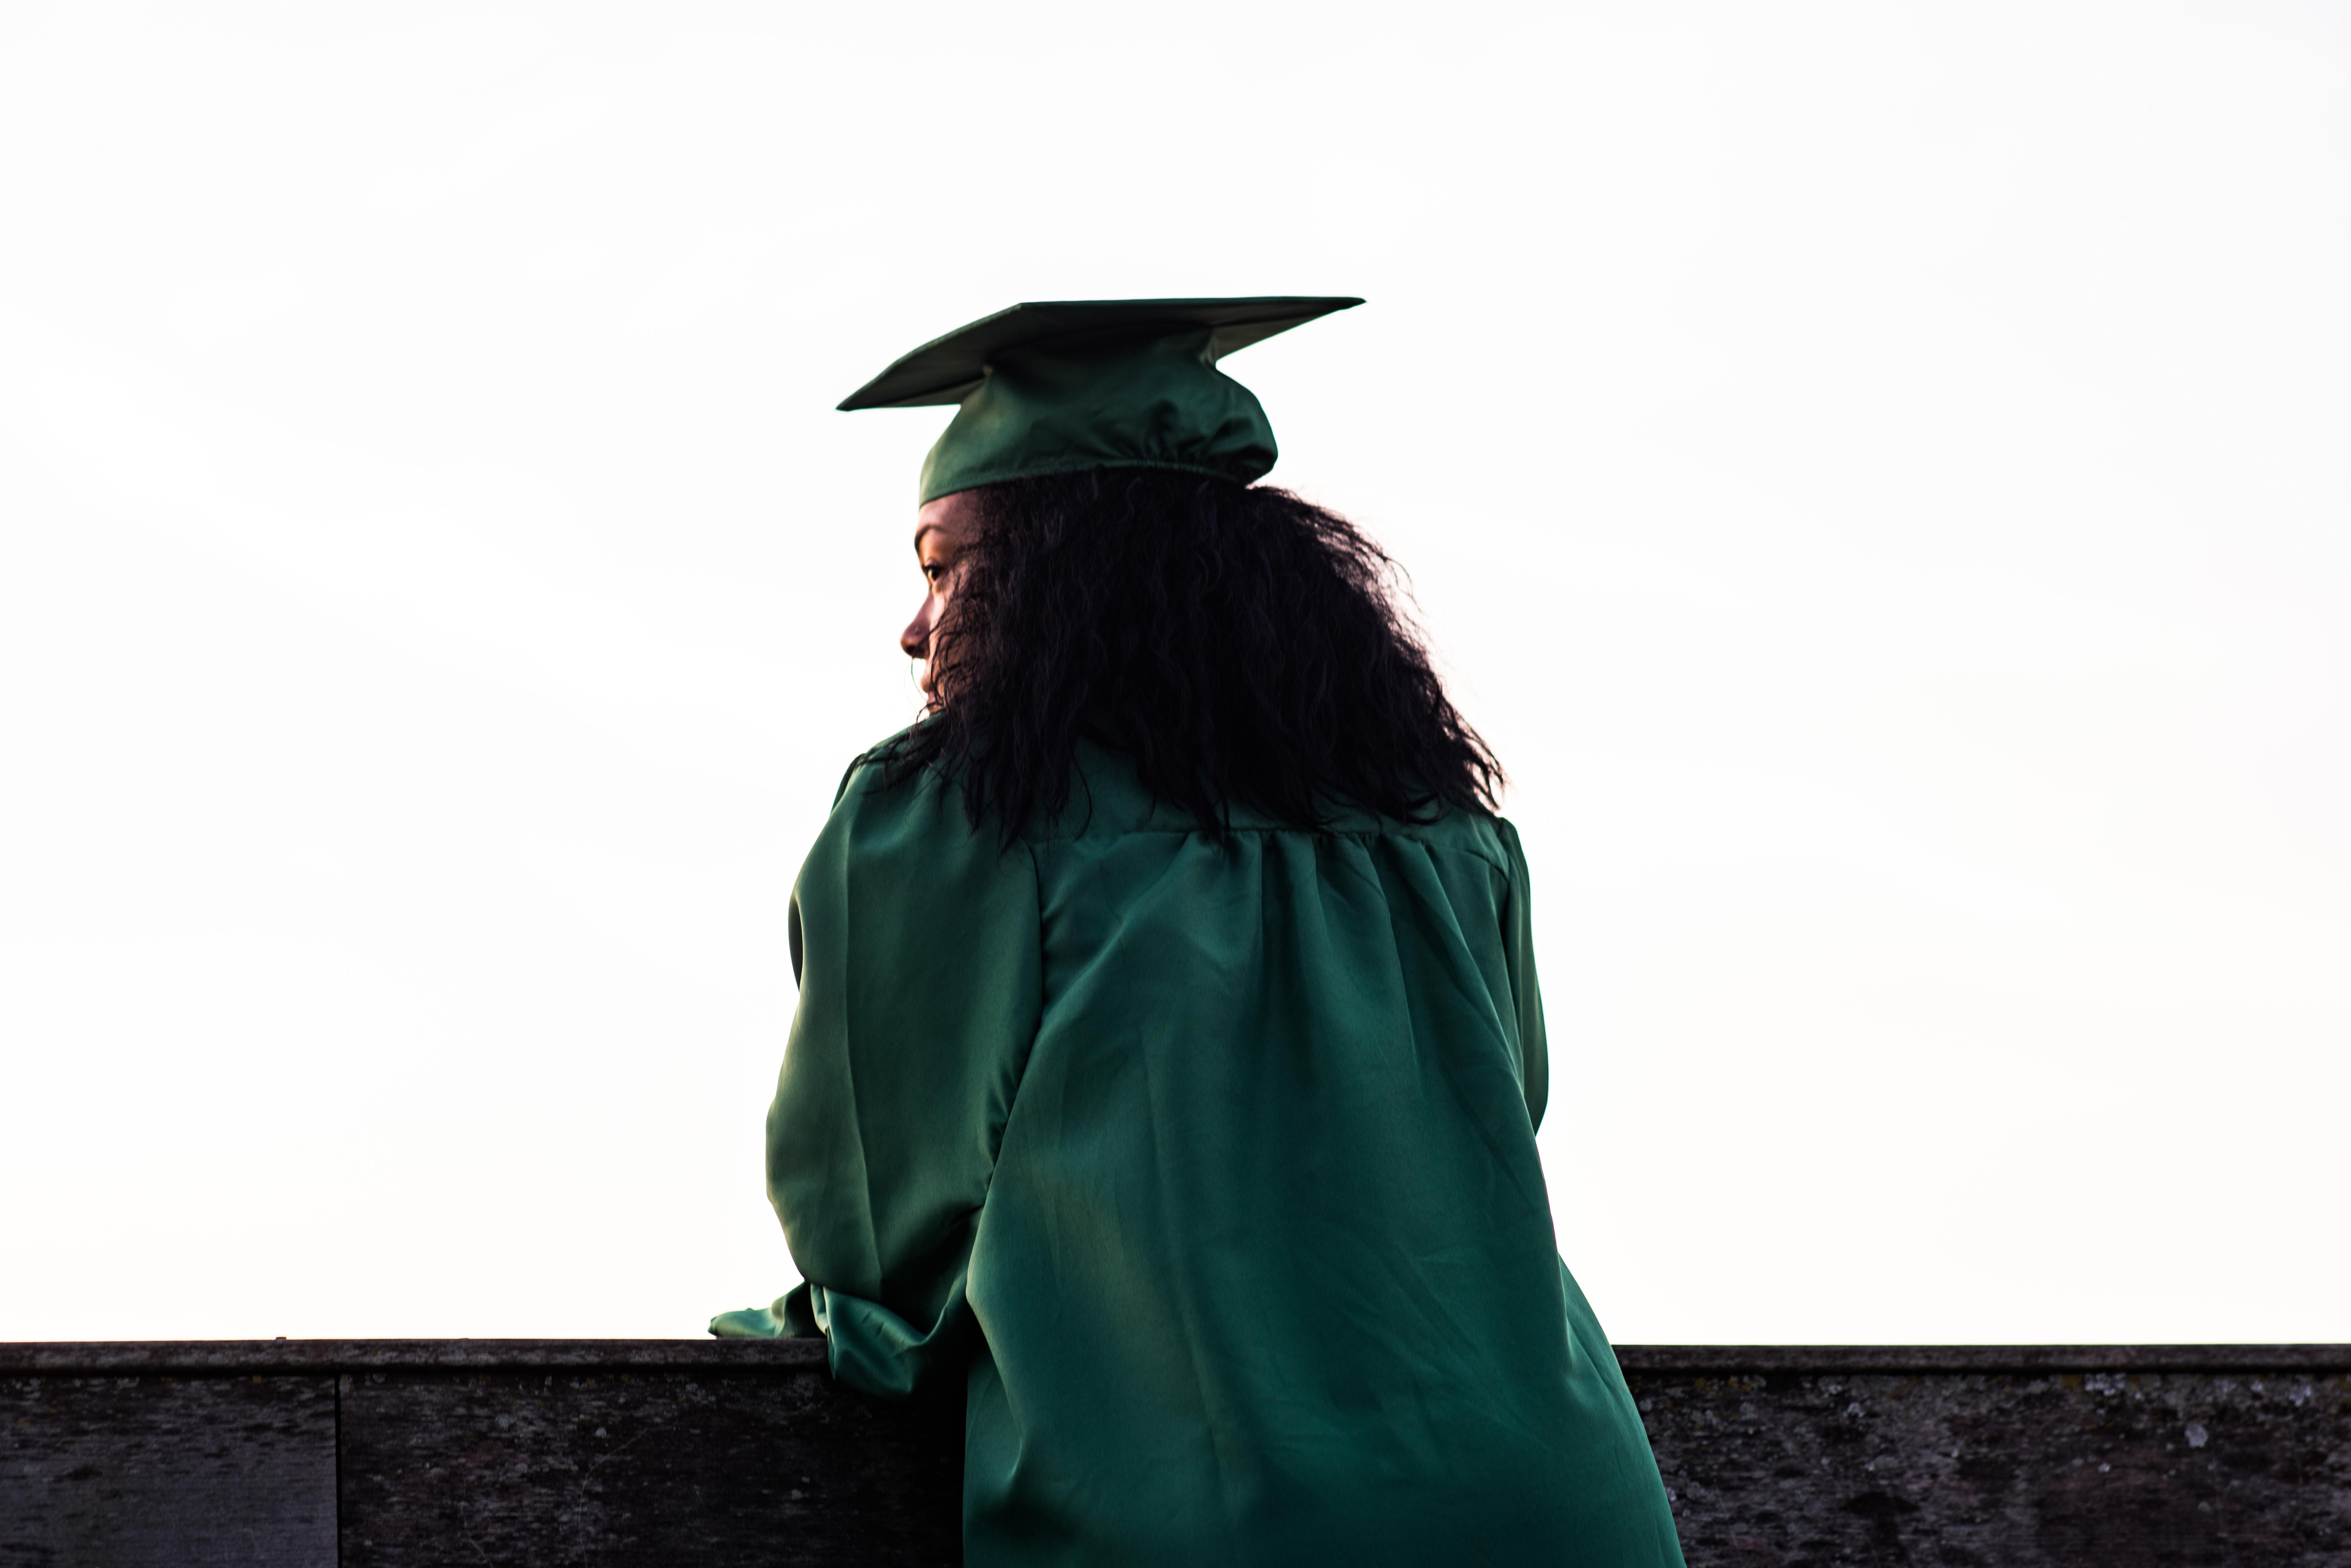 silhouette of person with long hair in graduation cap and gown